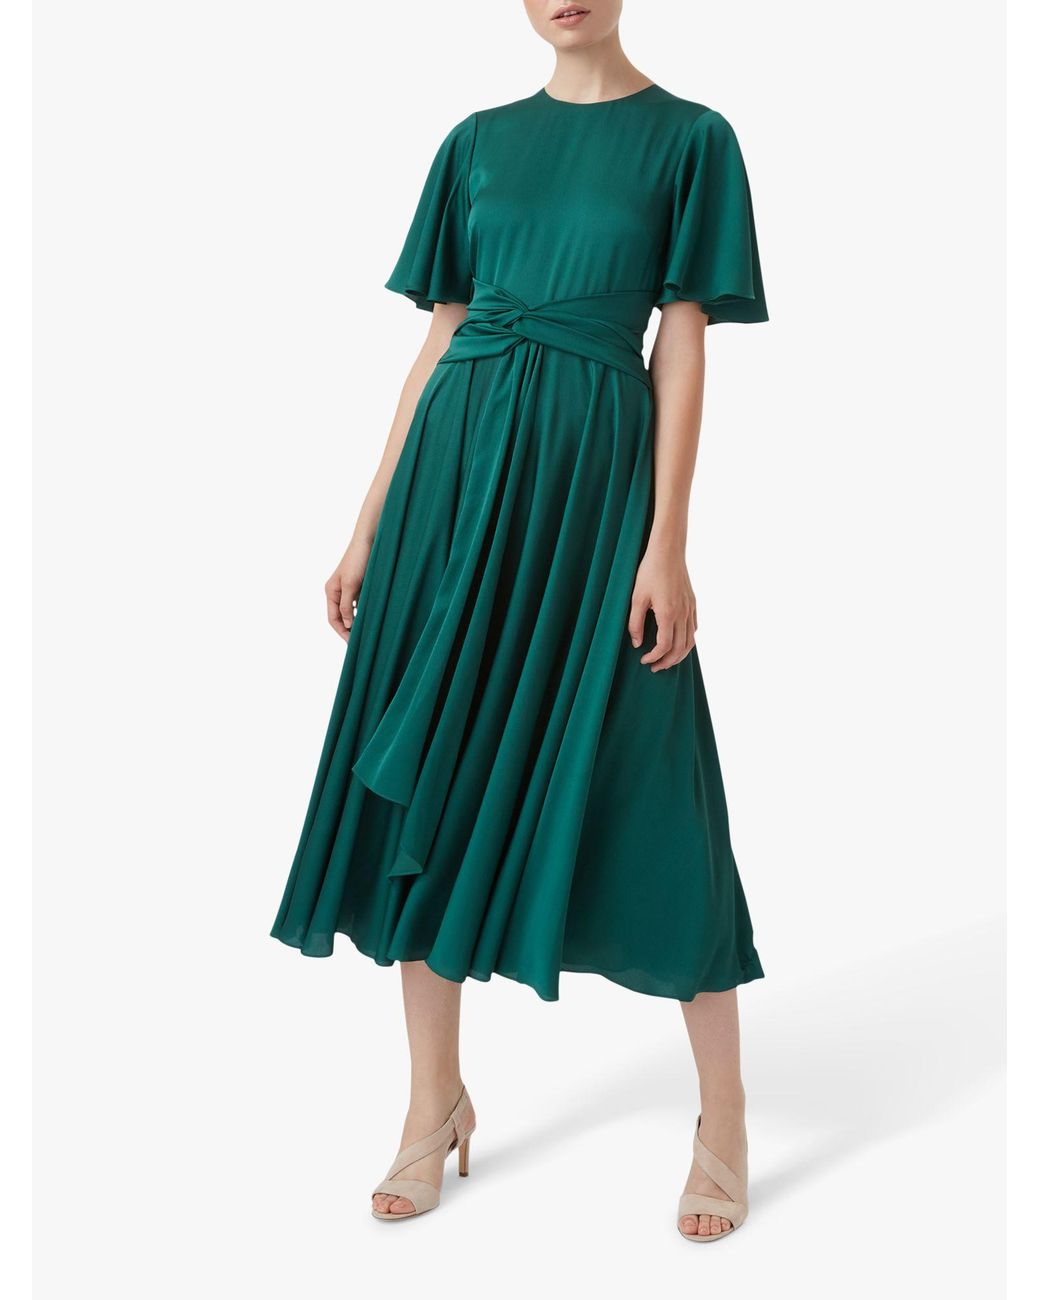 Hobbs 'leia' Fit & Flare Dress in Green | Lyst UK